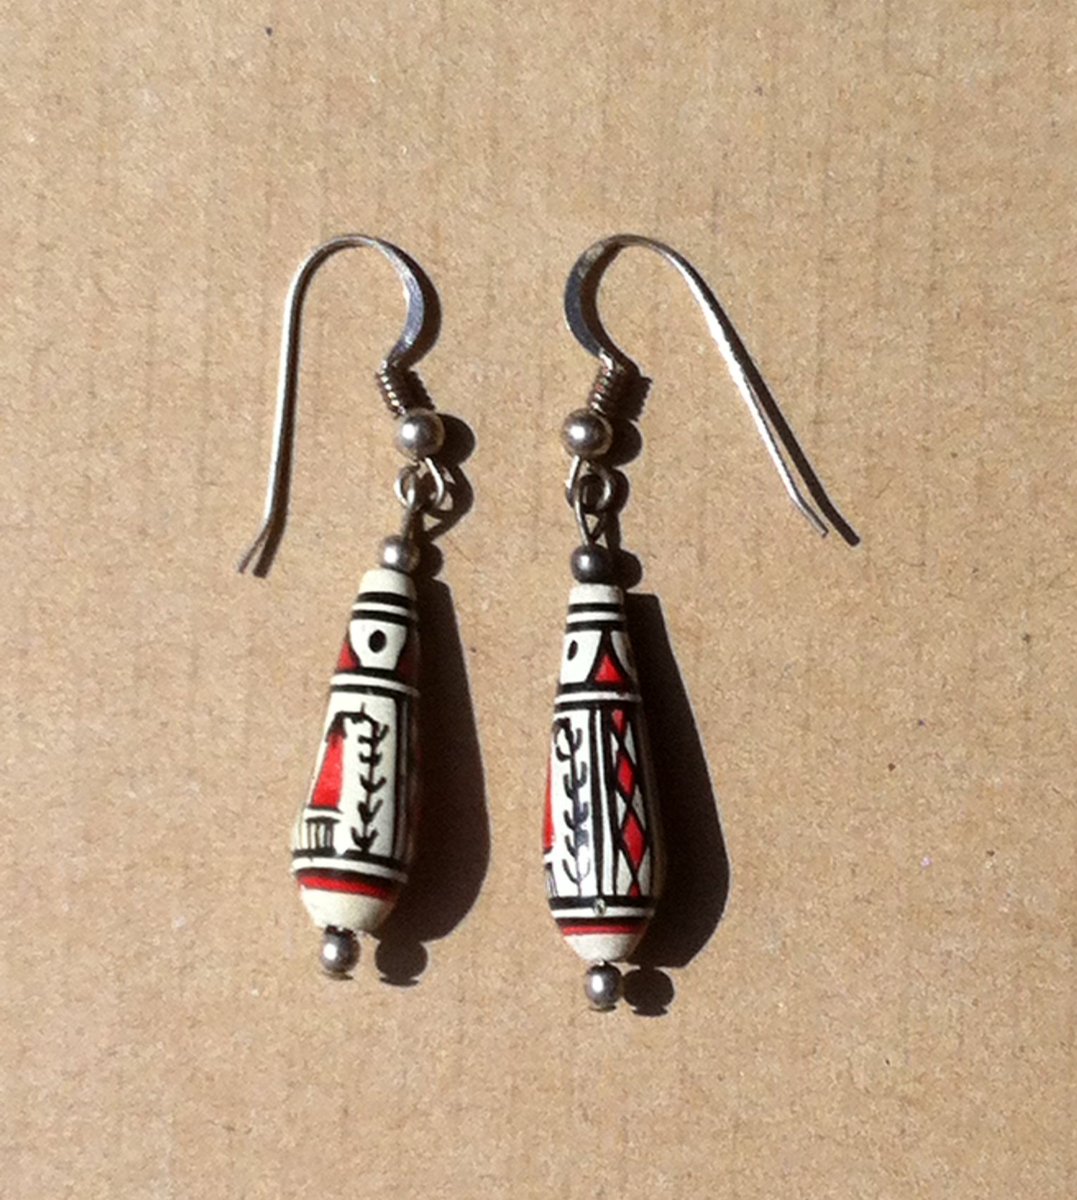 Excited to share the latest addition to my #etsy shop: vintage ceramic drop ear rings, south american folk pattern in red and black, sterling silver hooks etsy.me/2MULlTY #jewelry #earrings #no #women #ceramic #earlobe #vintagejewelry #ceramicbeads #sterlingsil